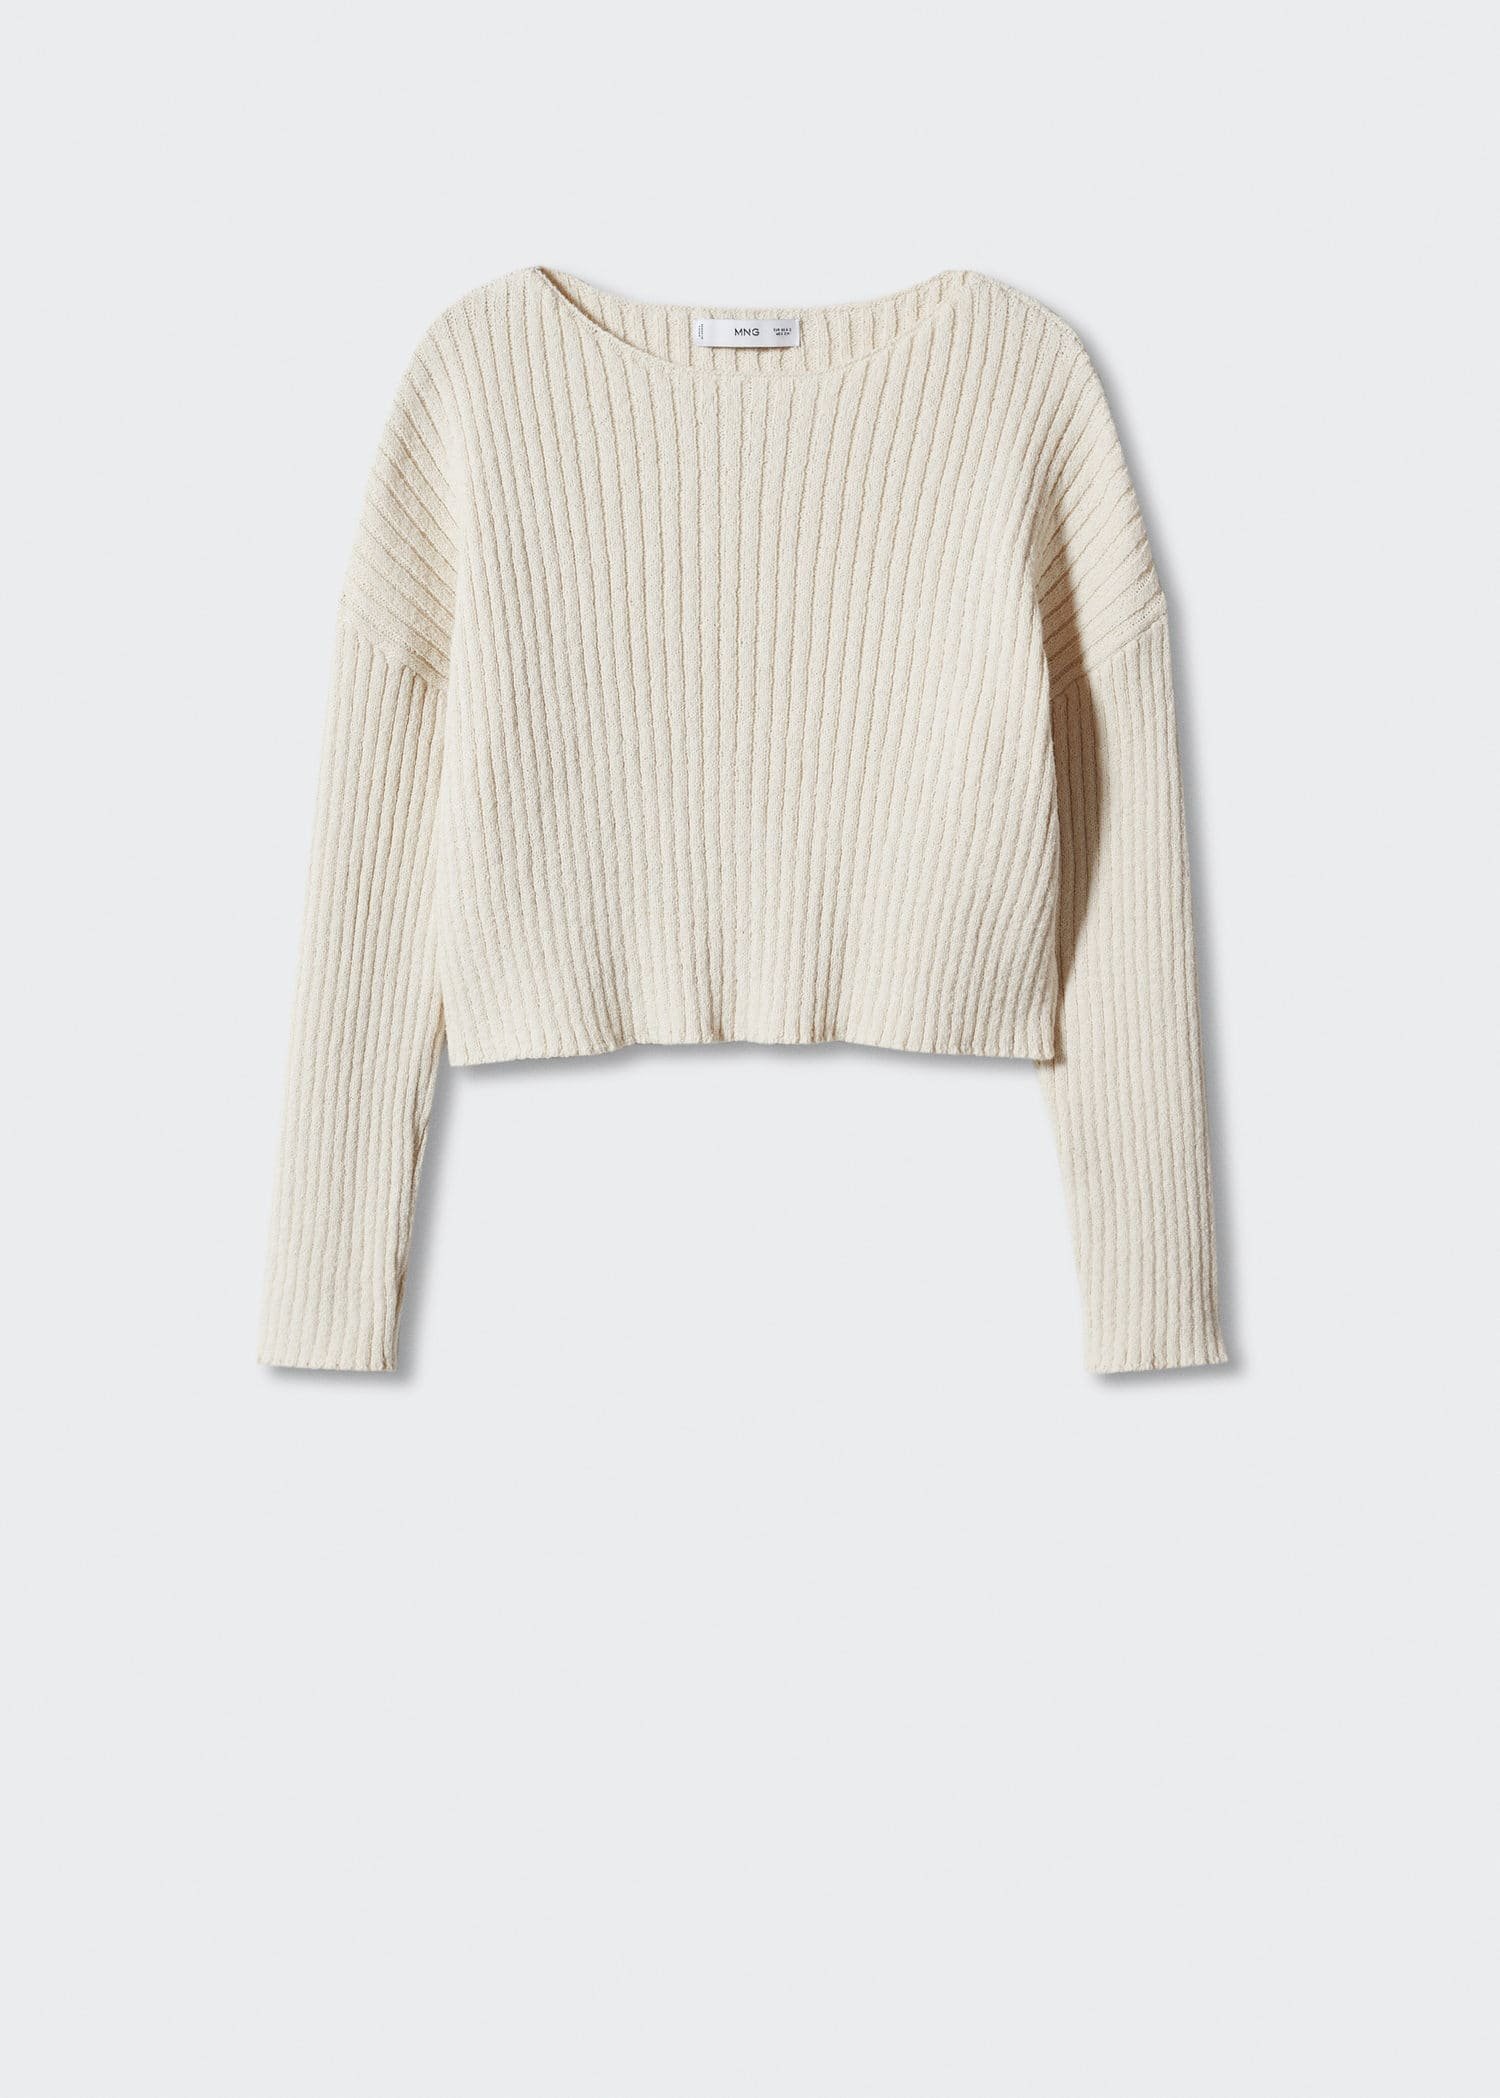 Cream Cropped Sweater - Boat Neck Sweater - Ribbed Knit Sweater - Lulus